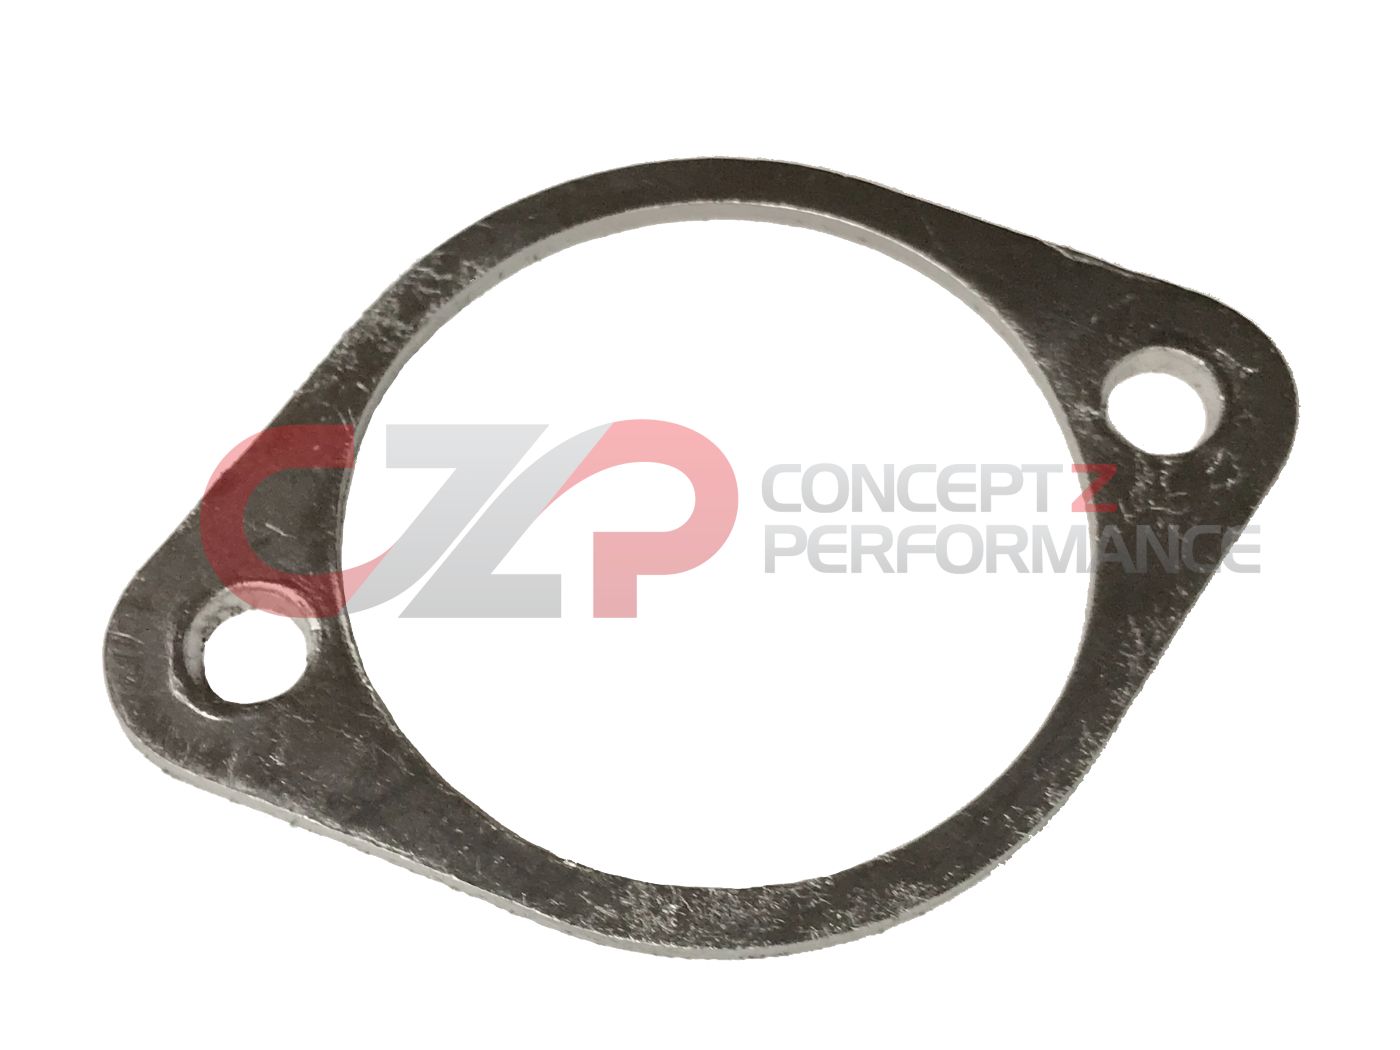 CZP XT eXtra Thick 2 Bolt 3" ID Exhaust Gasket